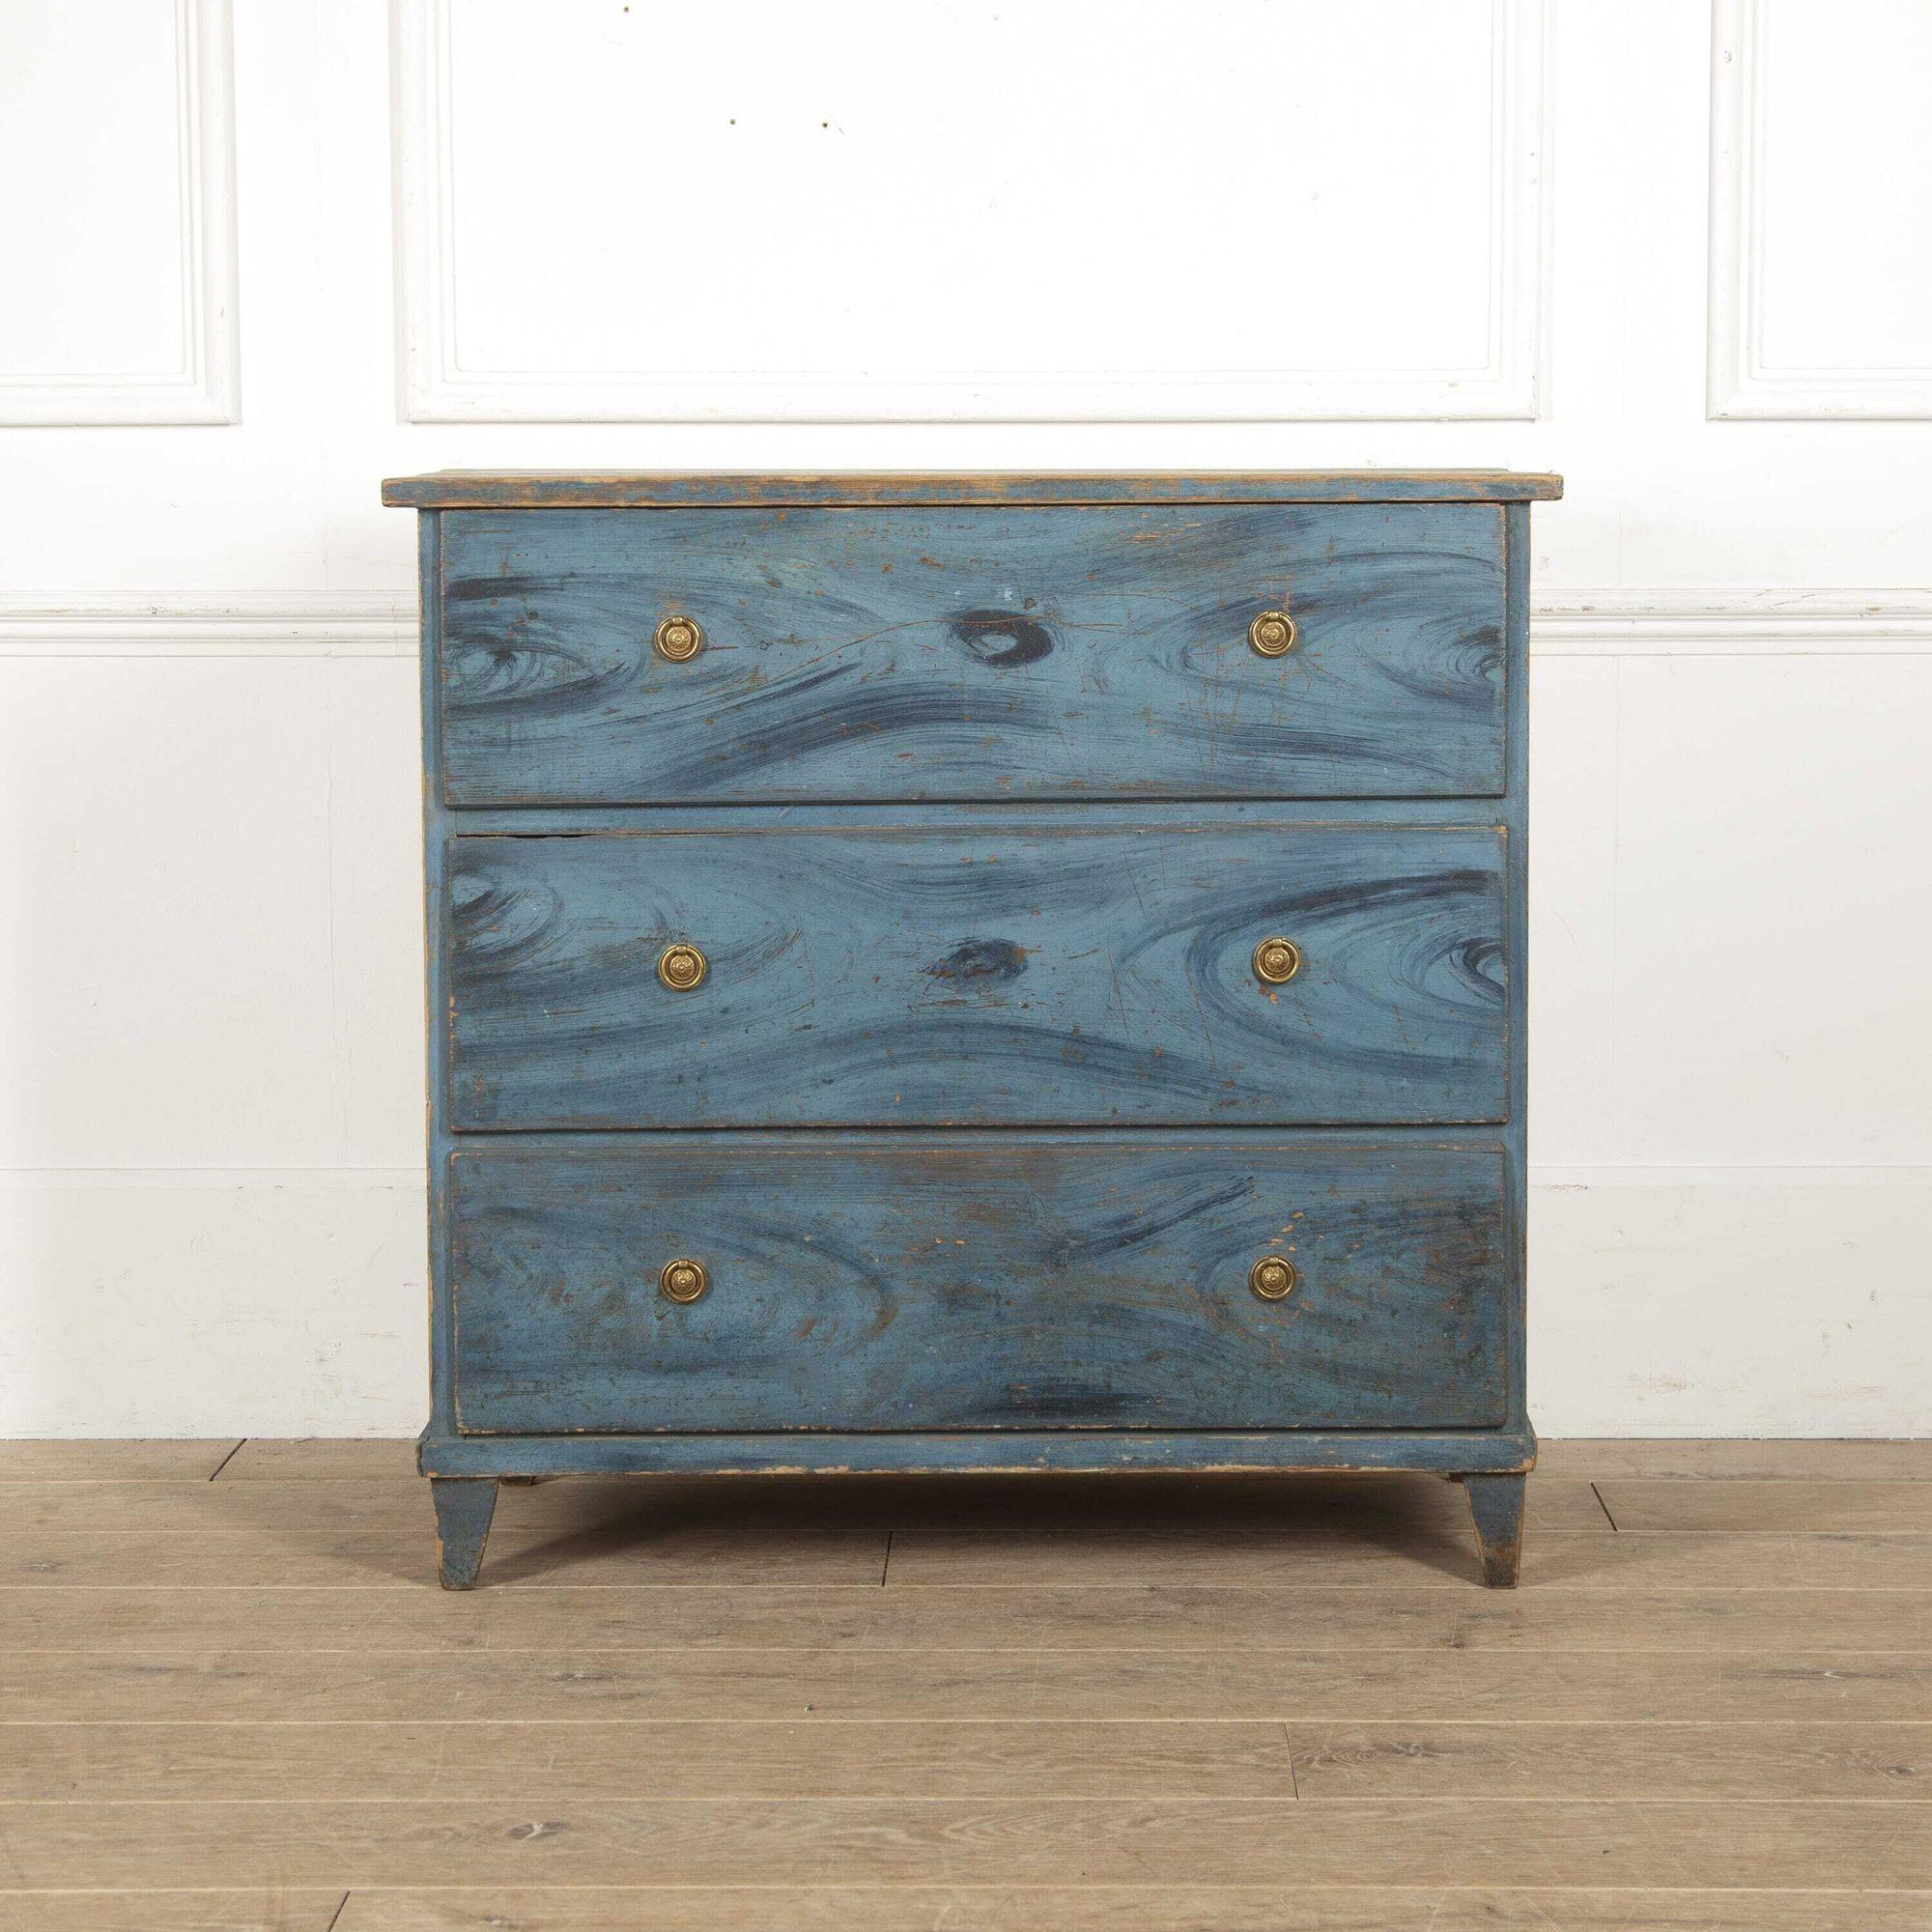 Stunning Swedish three-drawer commode.
This commode is in its lovely original two-tone blue paint that highlights its striking patina.
The top drawer has three secret drawers inside that are wonderfully spacious and are mounted with lovely brass